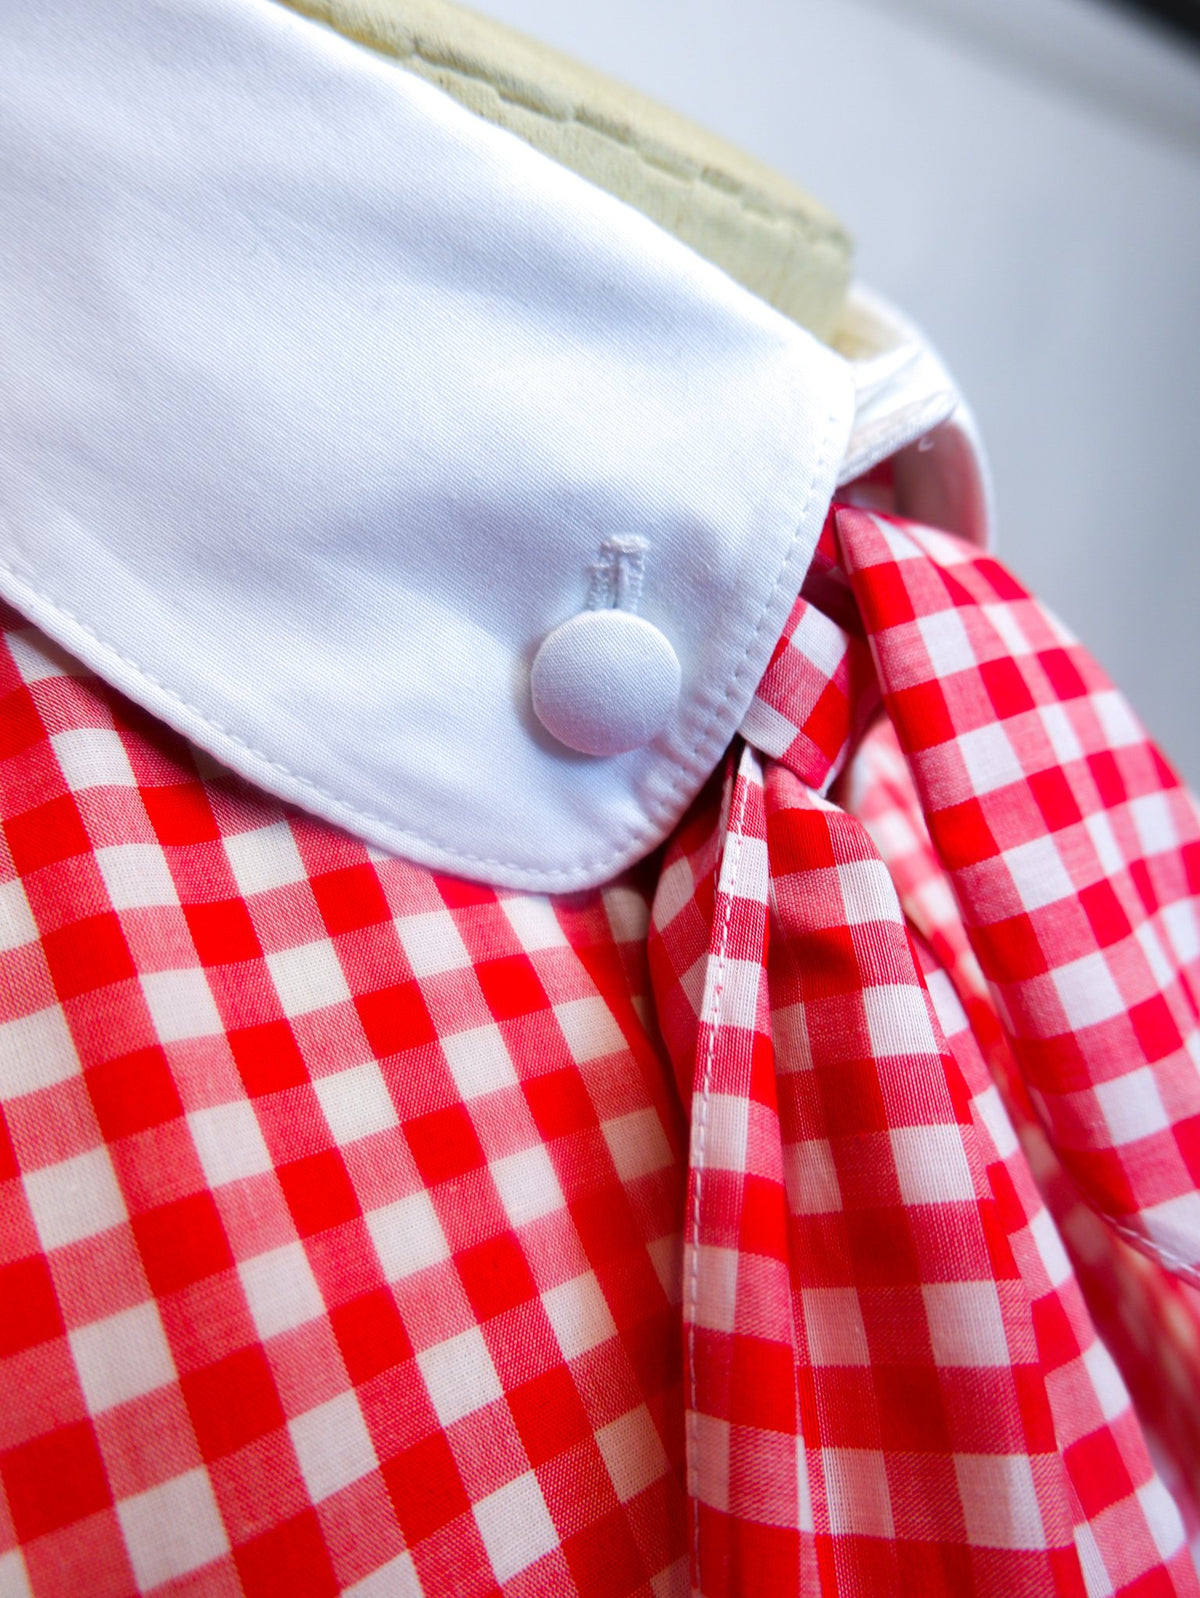 DRESS SHIRT IN RED CHECK WITH WHITE CONTRAST - MADE TO ORDER-menswear-A Child Of The Jago